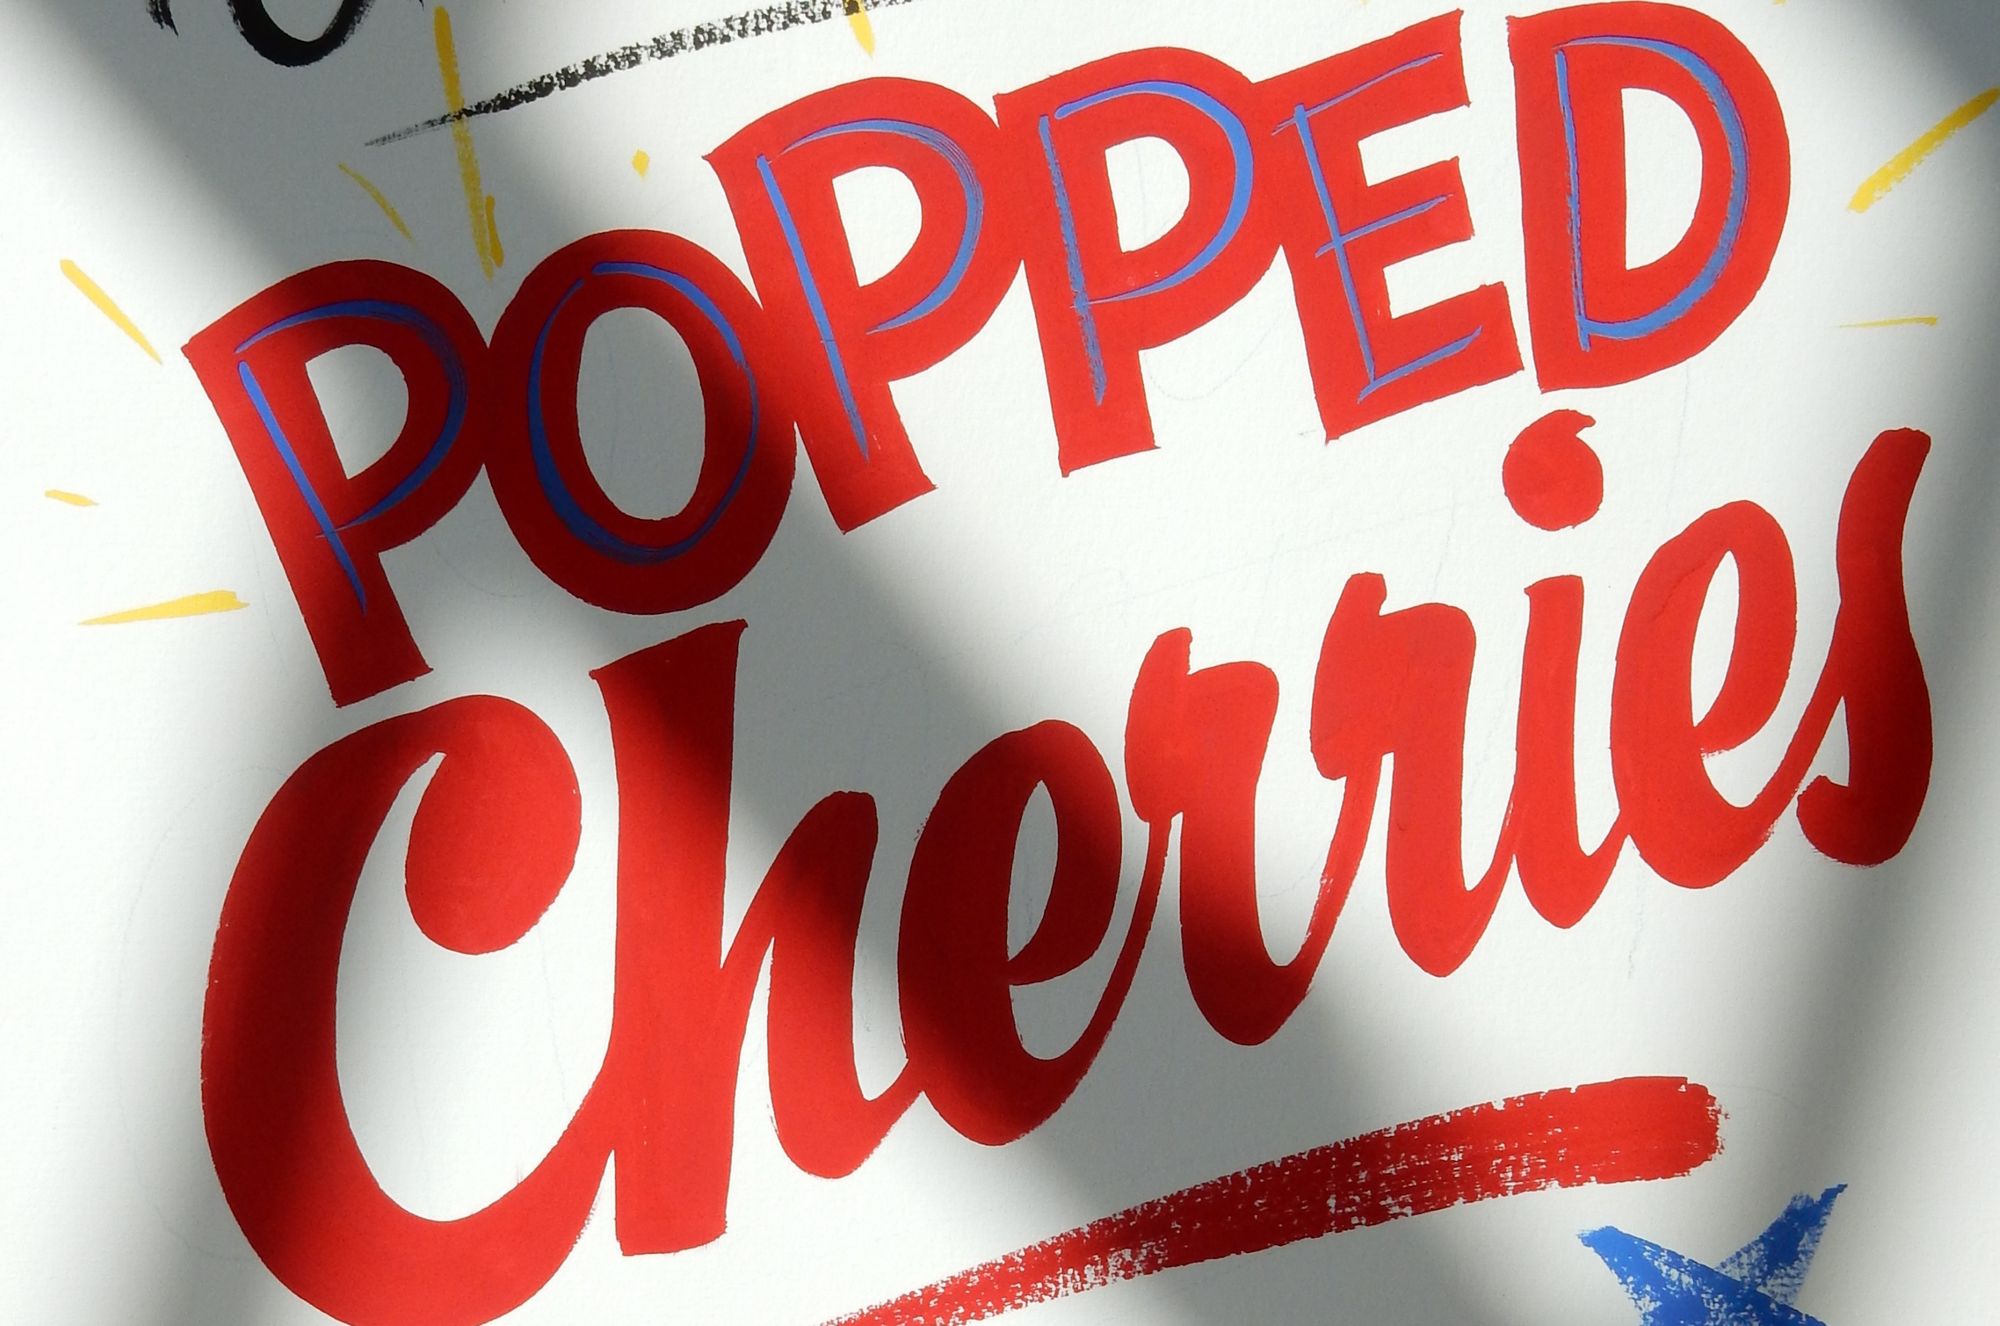 Hand-painted lettering that reads 'popped cherries'.